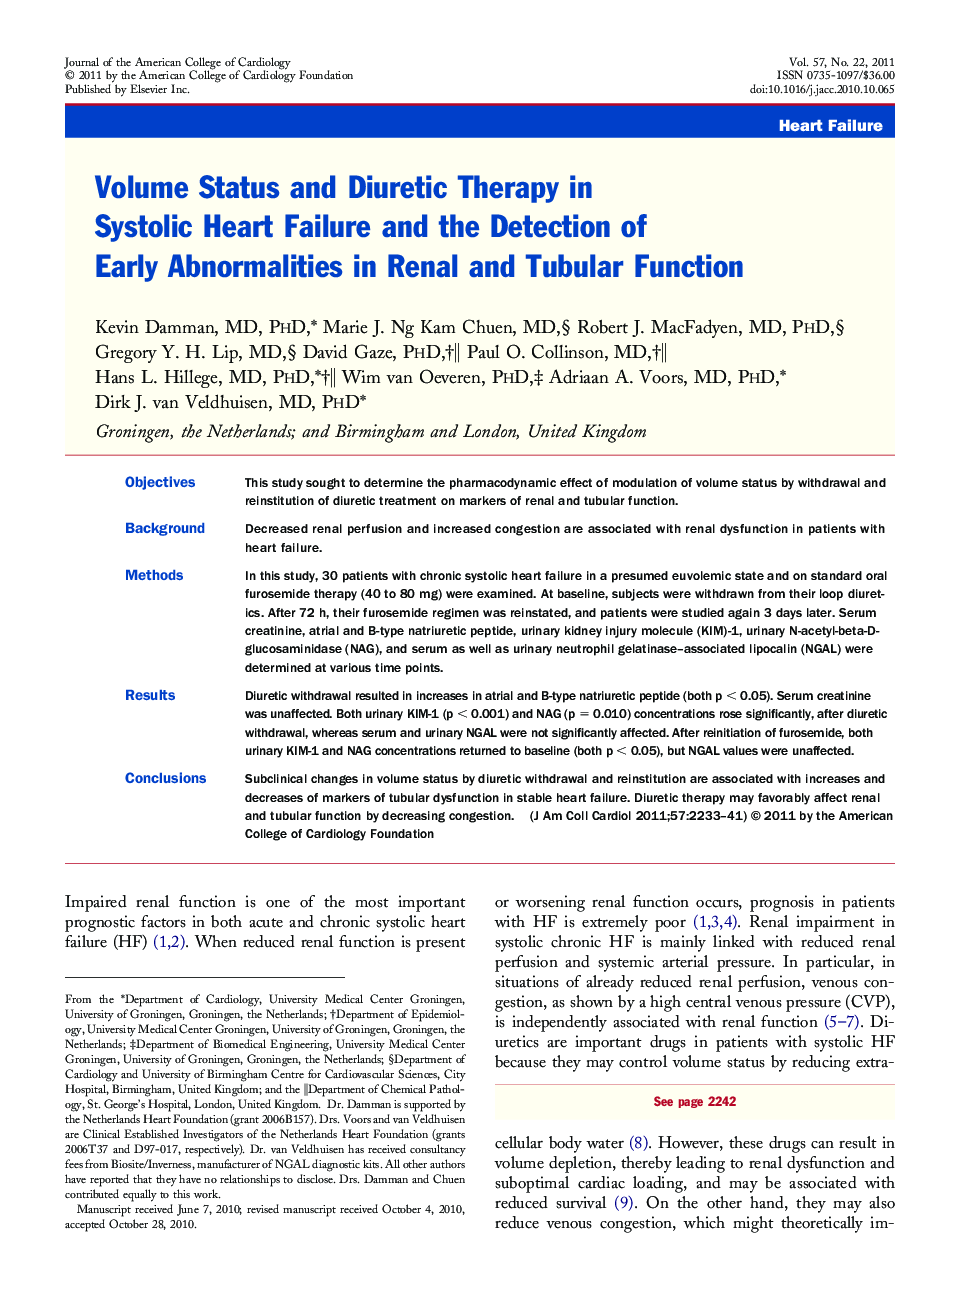 Volume Status and Diuretic Therapy in Systolic Heart Failure and the Detection of Early Abnormalities in Renal and Tubular Function 